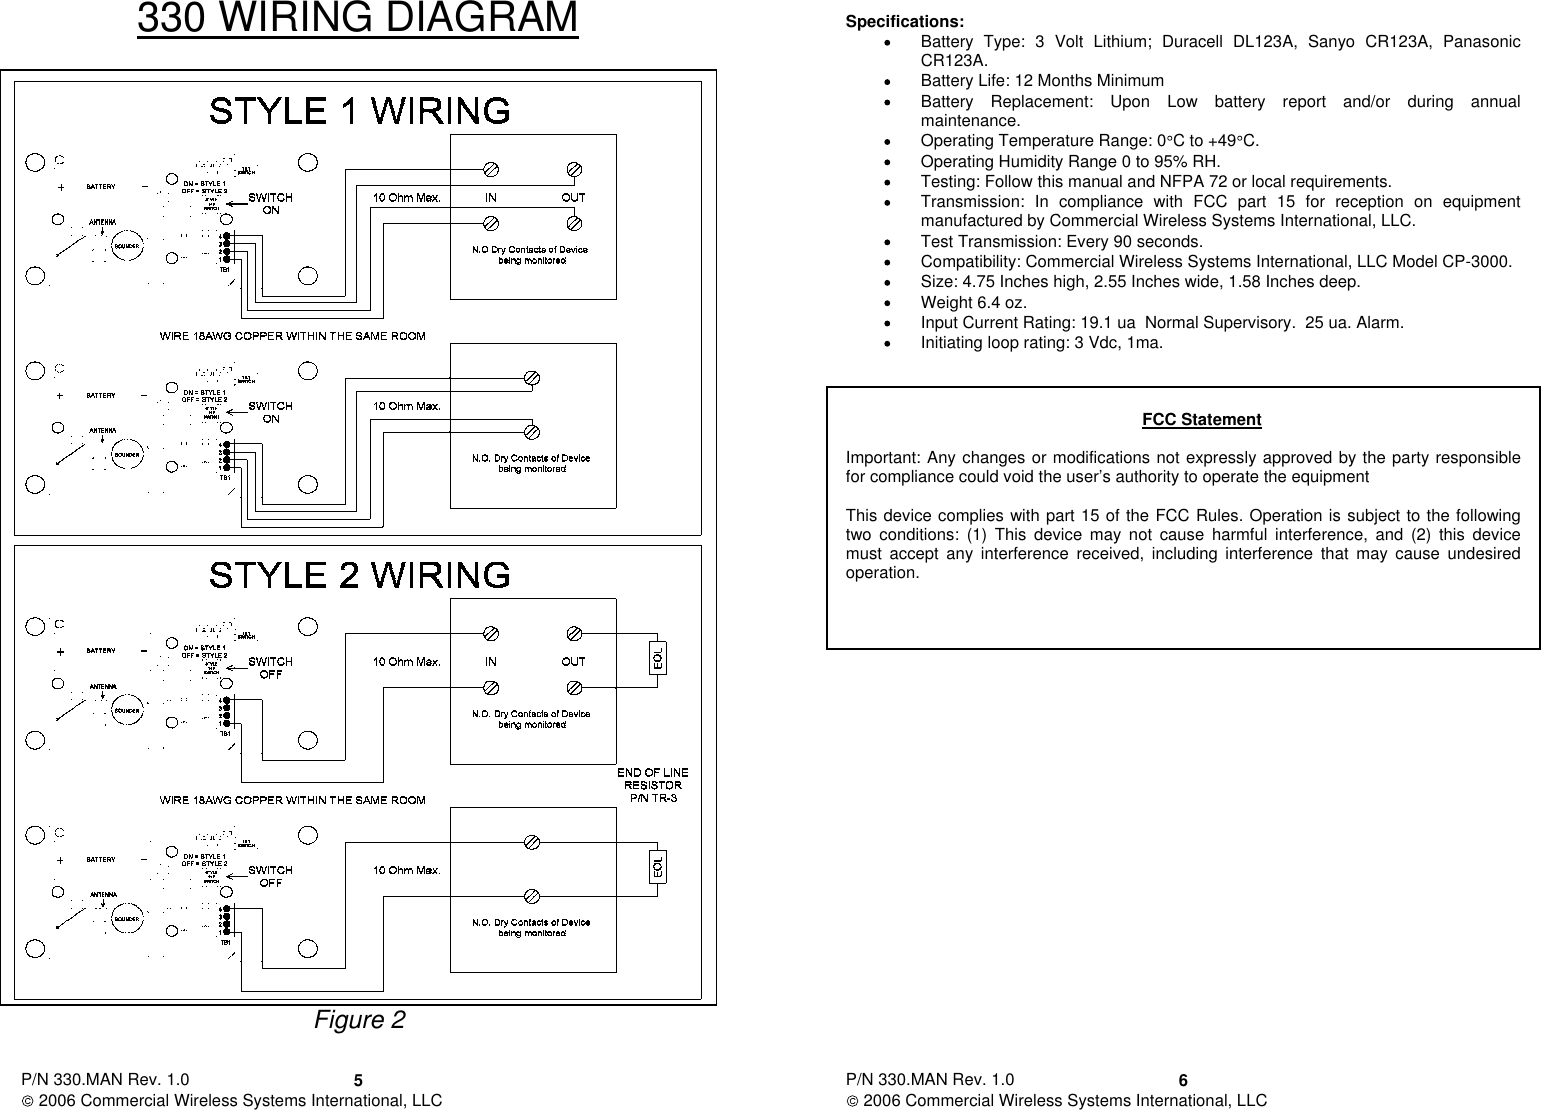 P/N 330.MAN Rev. 1.0   2006 Commercial Wireless Systems International, LLC 5330 WIRING DIAGRAM Figure 2  P/N 330.MAN Rev. 1.0   2006 Commercial Wireless Systems International, LLC 6 Specifications: Battery  Type:  3  Volt  Lithium;  Duracell  DL123A,  Sanyo  CR123A,  Panasonic CR123A. Battery Life: 12 Months Minimum Battery  Replacement:  Upon  Low  battery  report  and/or  during  annual maintenance. Operating Temperature Range: 0C to +49 C. Operating Humidity Range 0 to 95% RH. Testing: Follow this manual and NFPA 72 or local requirements. Transmission:  In  compliance  with  FCC  part  15  for  reception  on  equipment manufactured by Commercial Wireless Systems International, LLC. Test Transmission: Every 90 seconds. Compatibility: Commercial Wireless Systems International, LLC Model CP-3000. Size: 4.75 Inches high, 2.55 Inches wide, 1.58 Inches deep. Weight 6.4 oz. Input Current Rating: 19.1 ua  Normal Supervisory.  25 ua. Alarm. Initiating loop rating: 3 Vdc, 1ma.    FCC Statement  Important: Any changes or modifications not expressly approved by the party responsible for compliance could void the user’s authority to operate the equipment  This device complies with part 15 of the FCC Rules. Operation is subject to the following two  conditions:  (1)  This  device  may  not  cause  harmful  interference,  and  (2)  this  device must  accept  any  interference  received,  including  interference  that  may  cause  undesired operation.                  